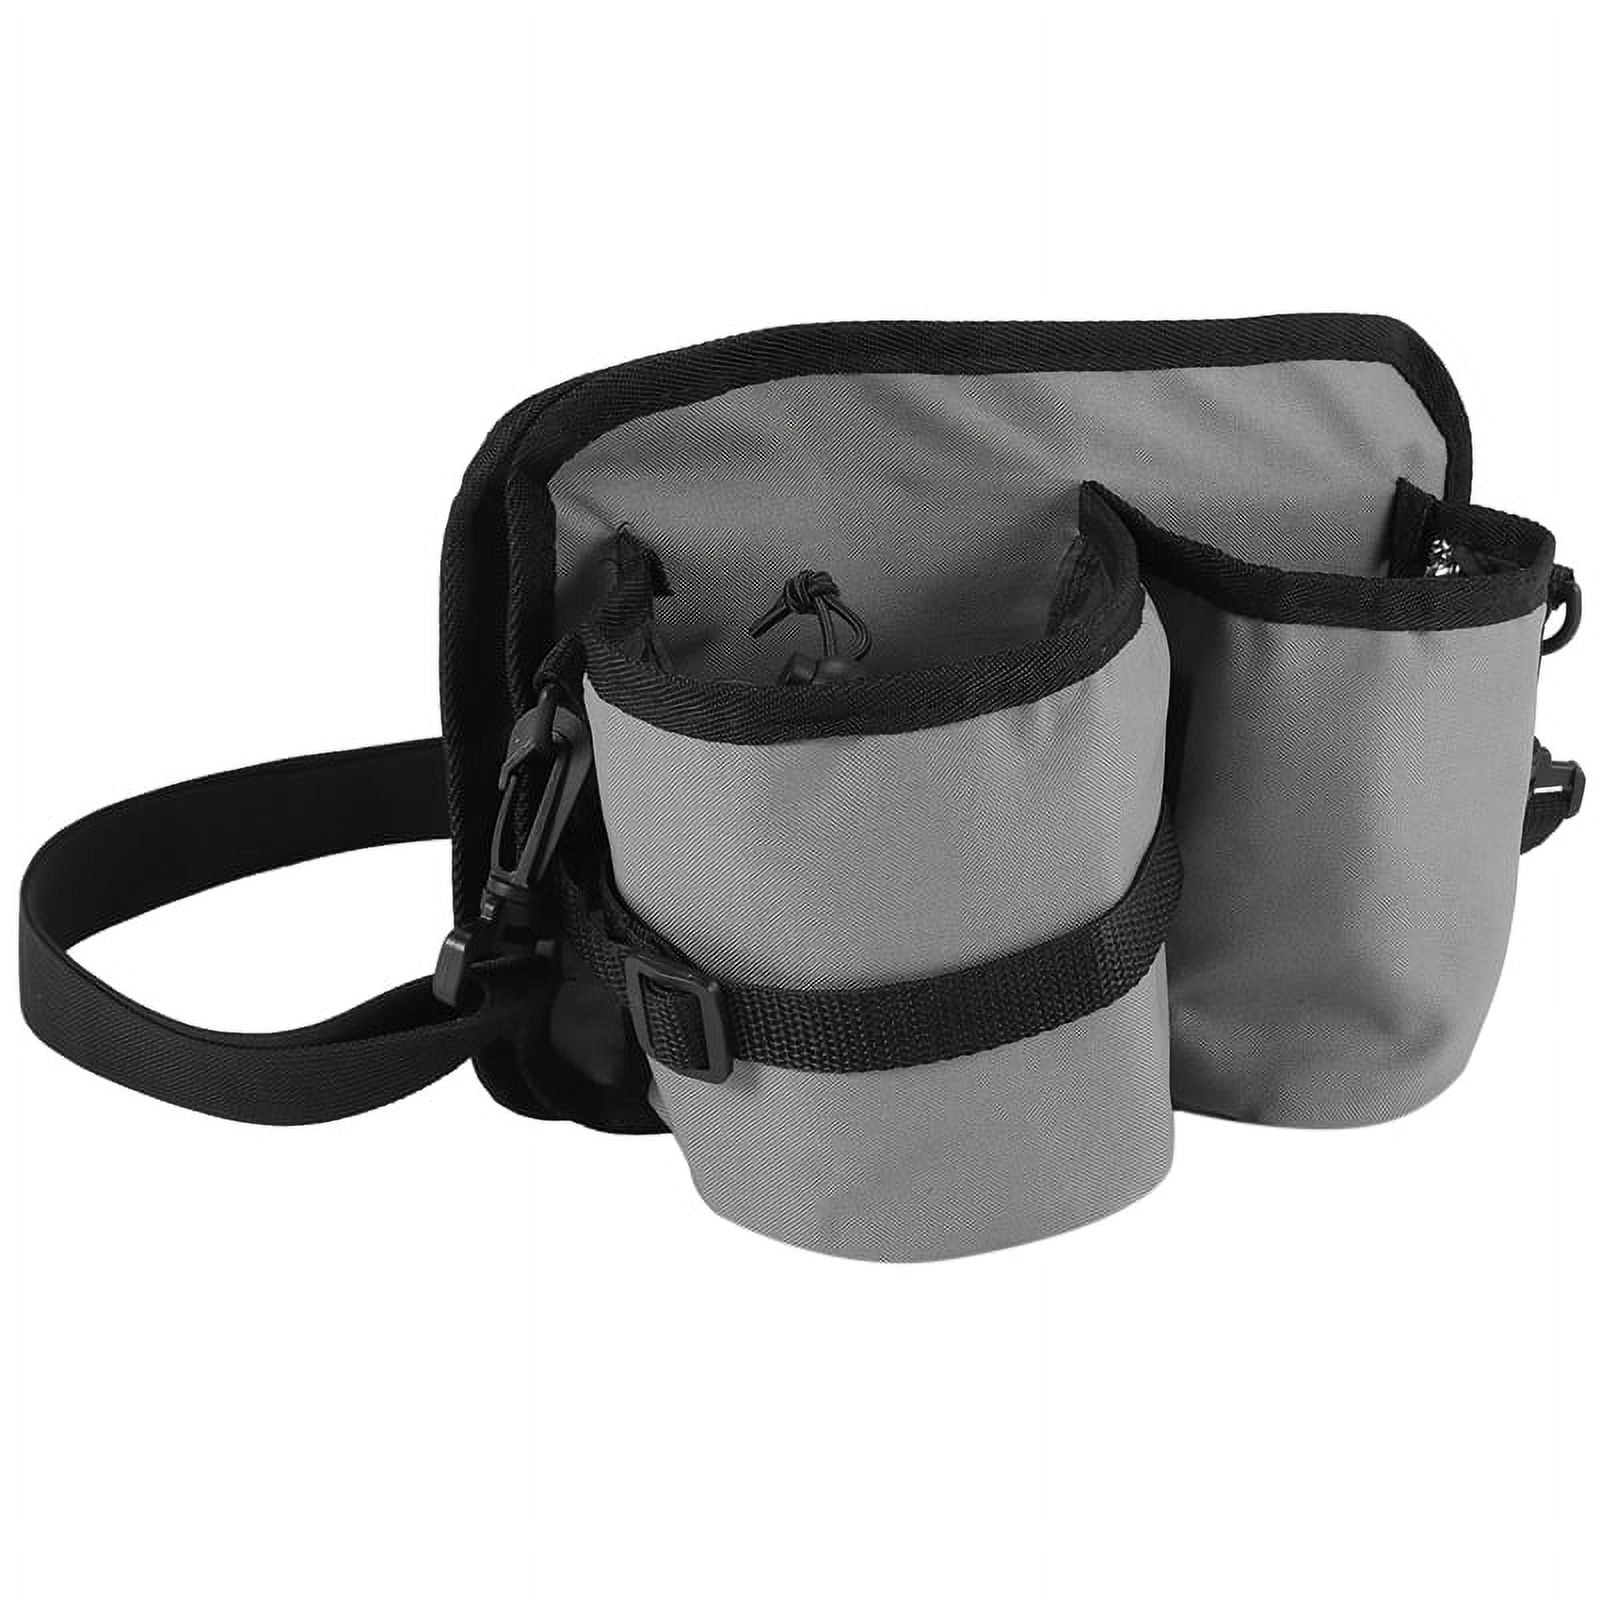 Luggage Travel Cup Holder Portable Drink Bag Hold Two Coffee